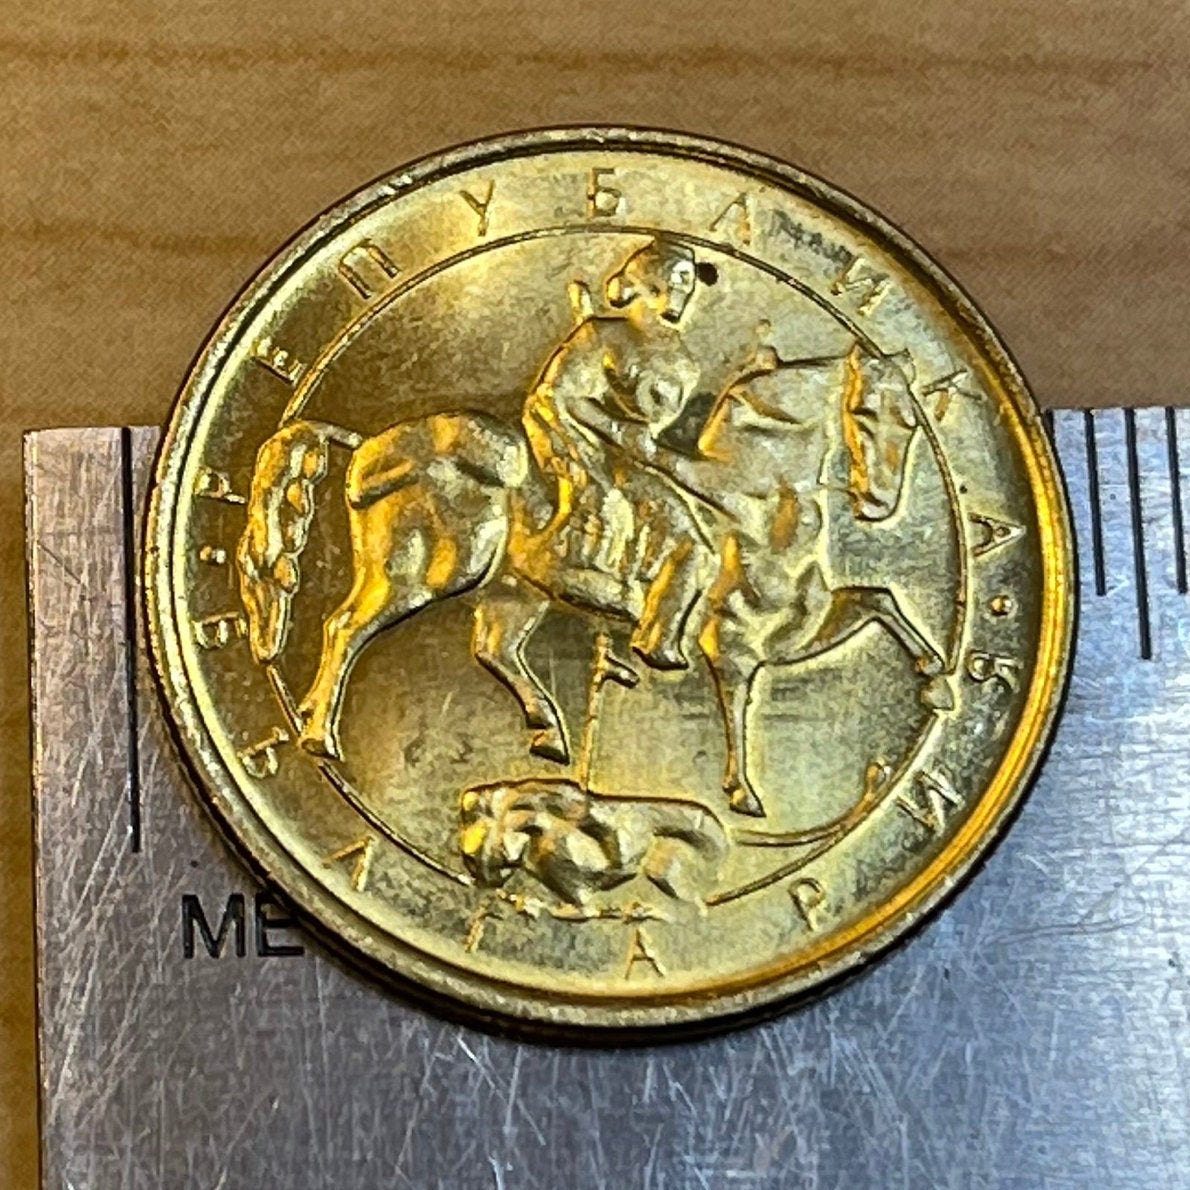 Horse-Riding God 1 Lev Bulgaria Authentic Coin Money for Jewelry and Craft Making (Madara Rider)